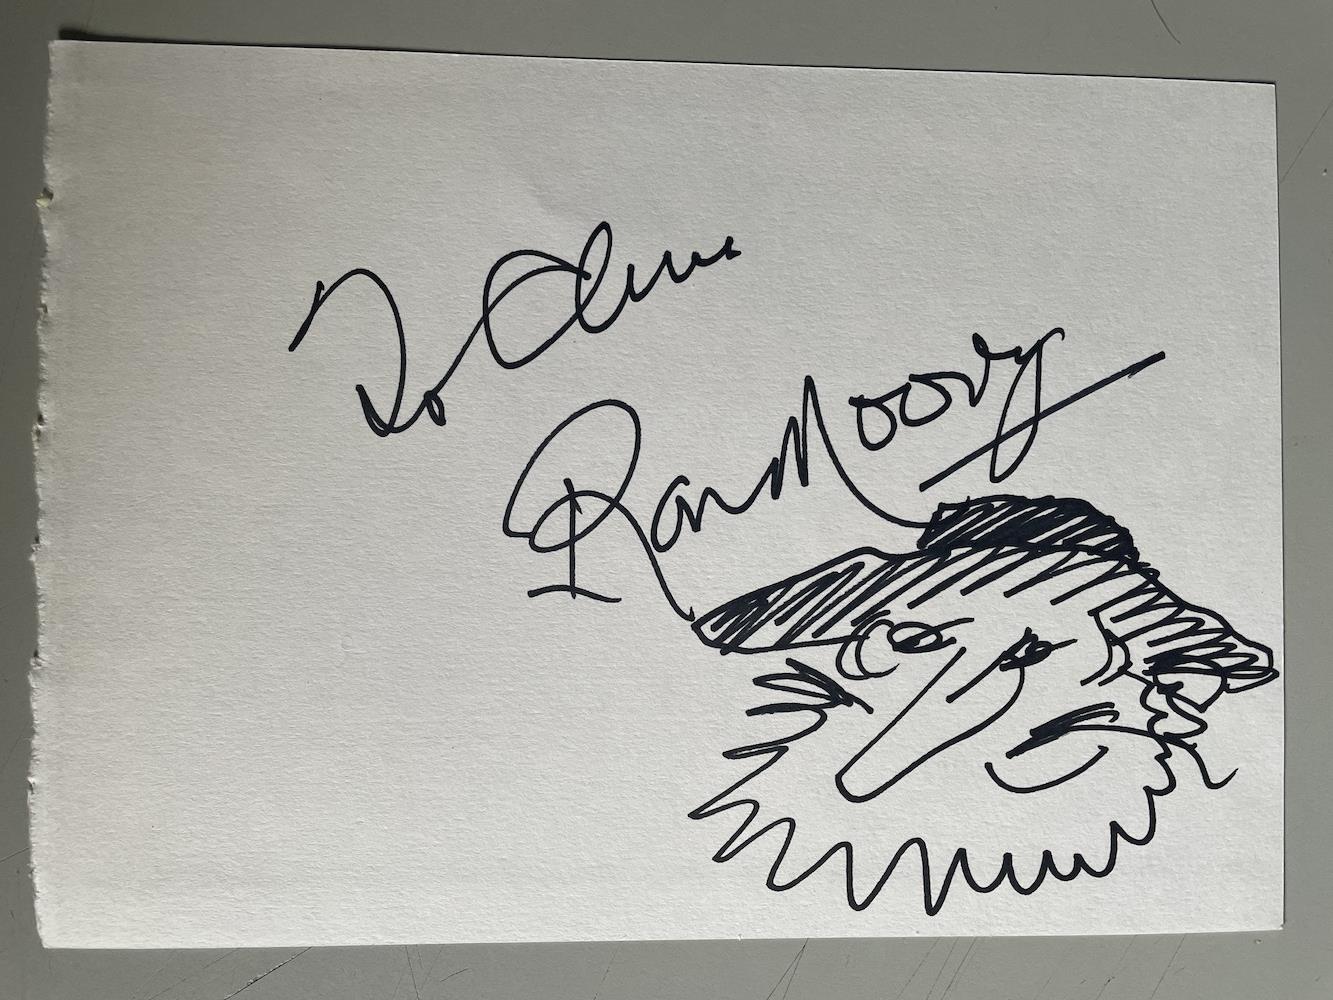 Ron Moody Late Great Actor Fagin Original Signed Sketch. Good condition. All autographs come with